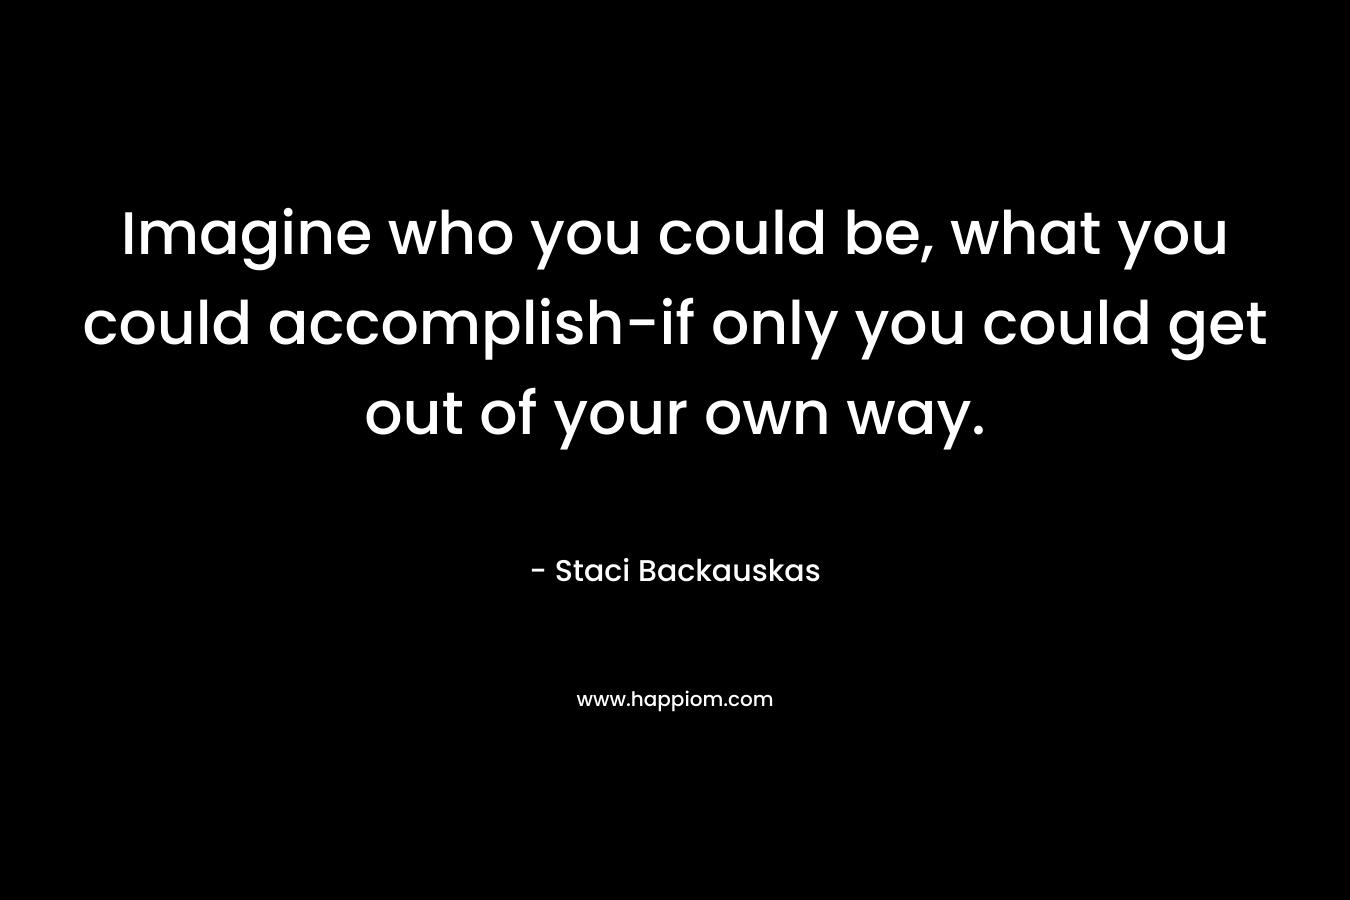 Imagine who you could be, what you could accomplish-if only you could get out of your own way.